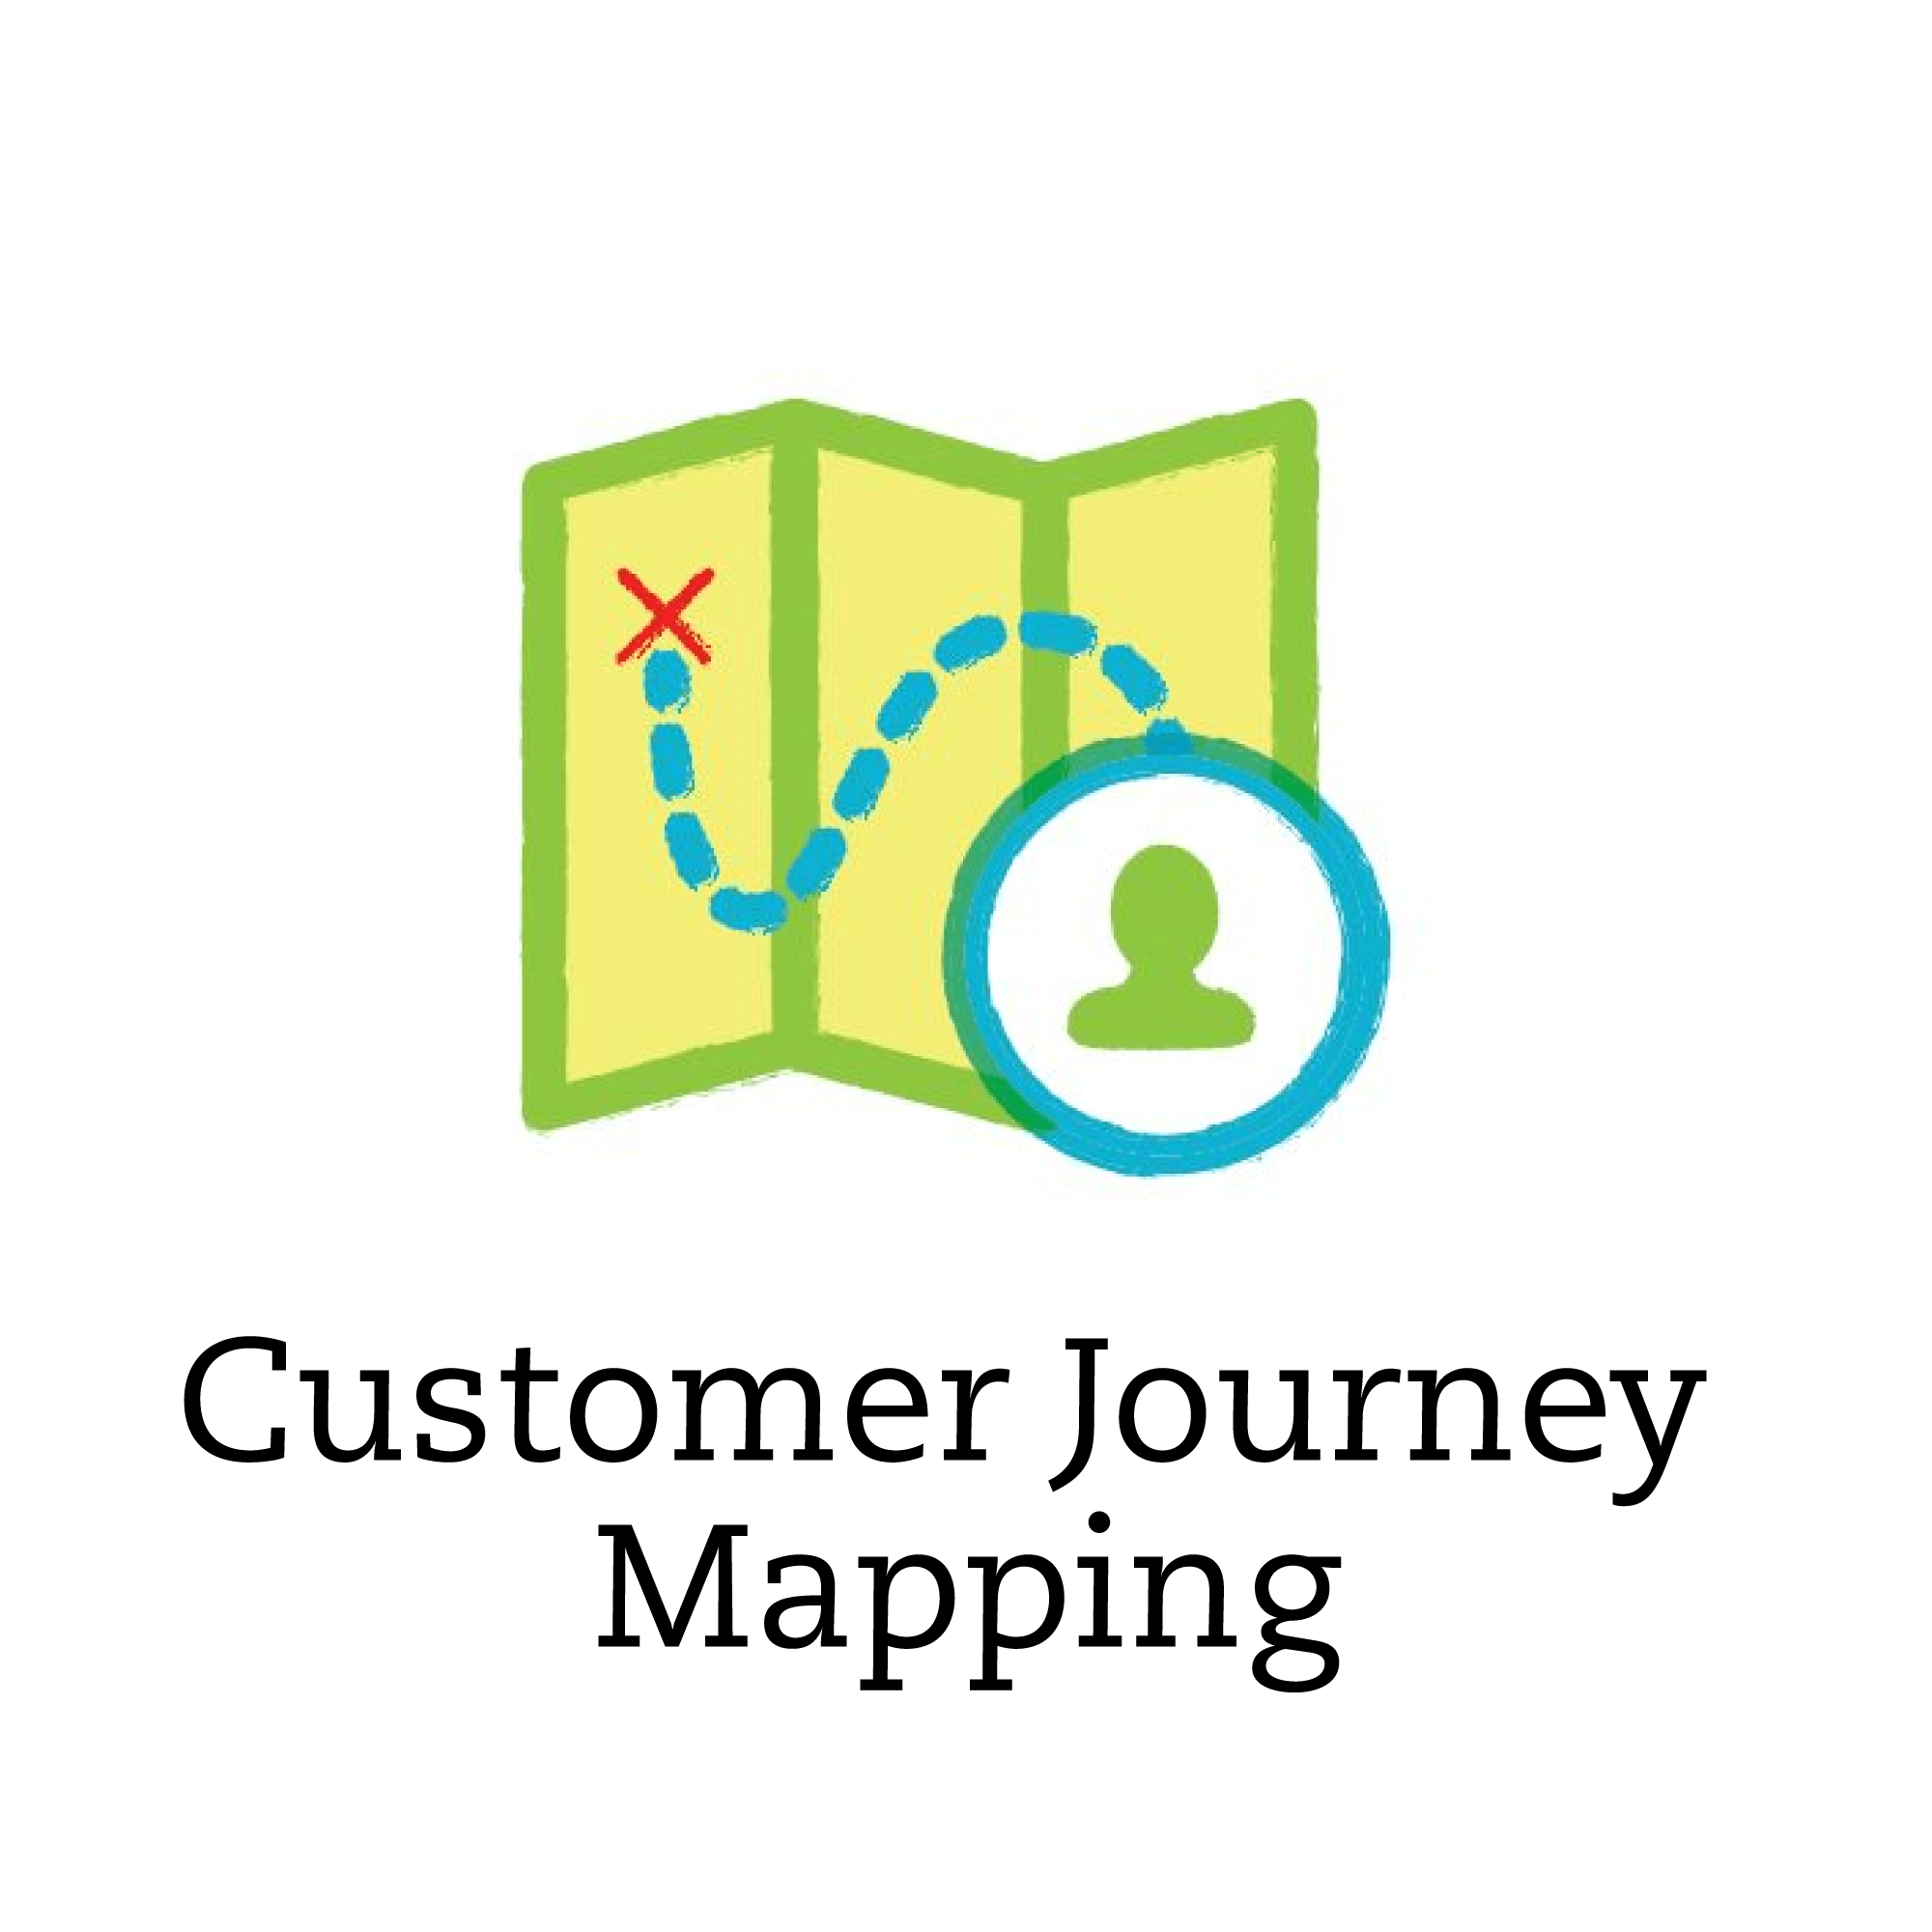 Introduction to Customer Journey Mapping